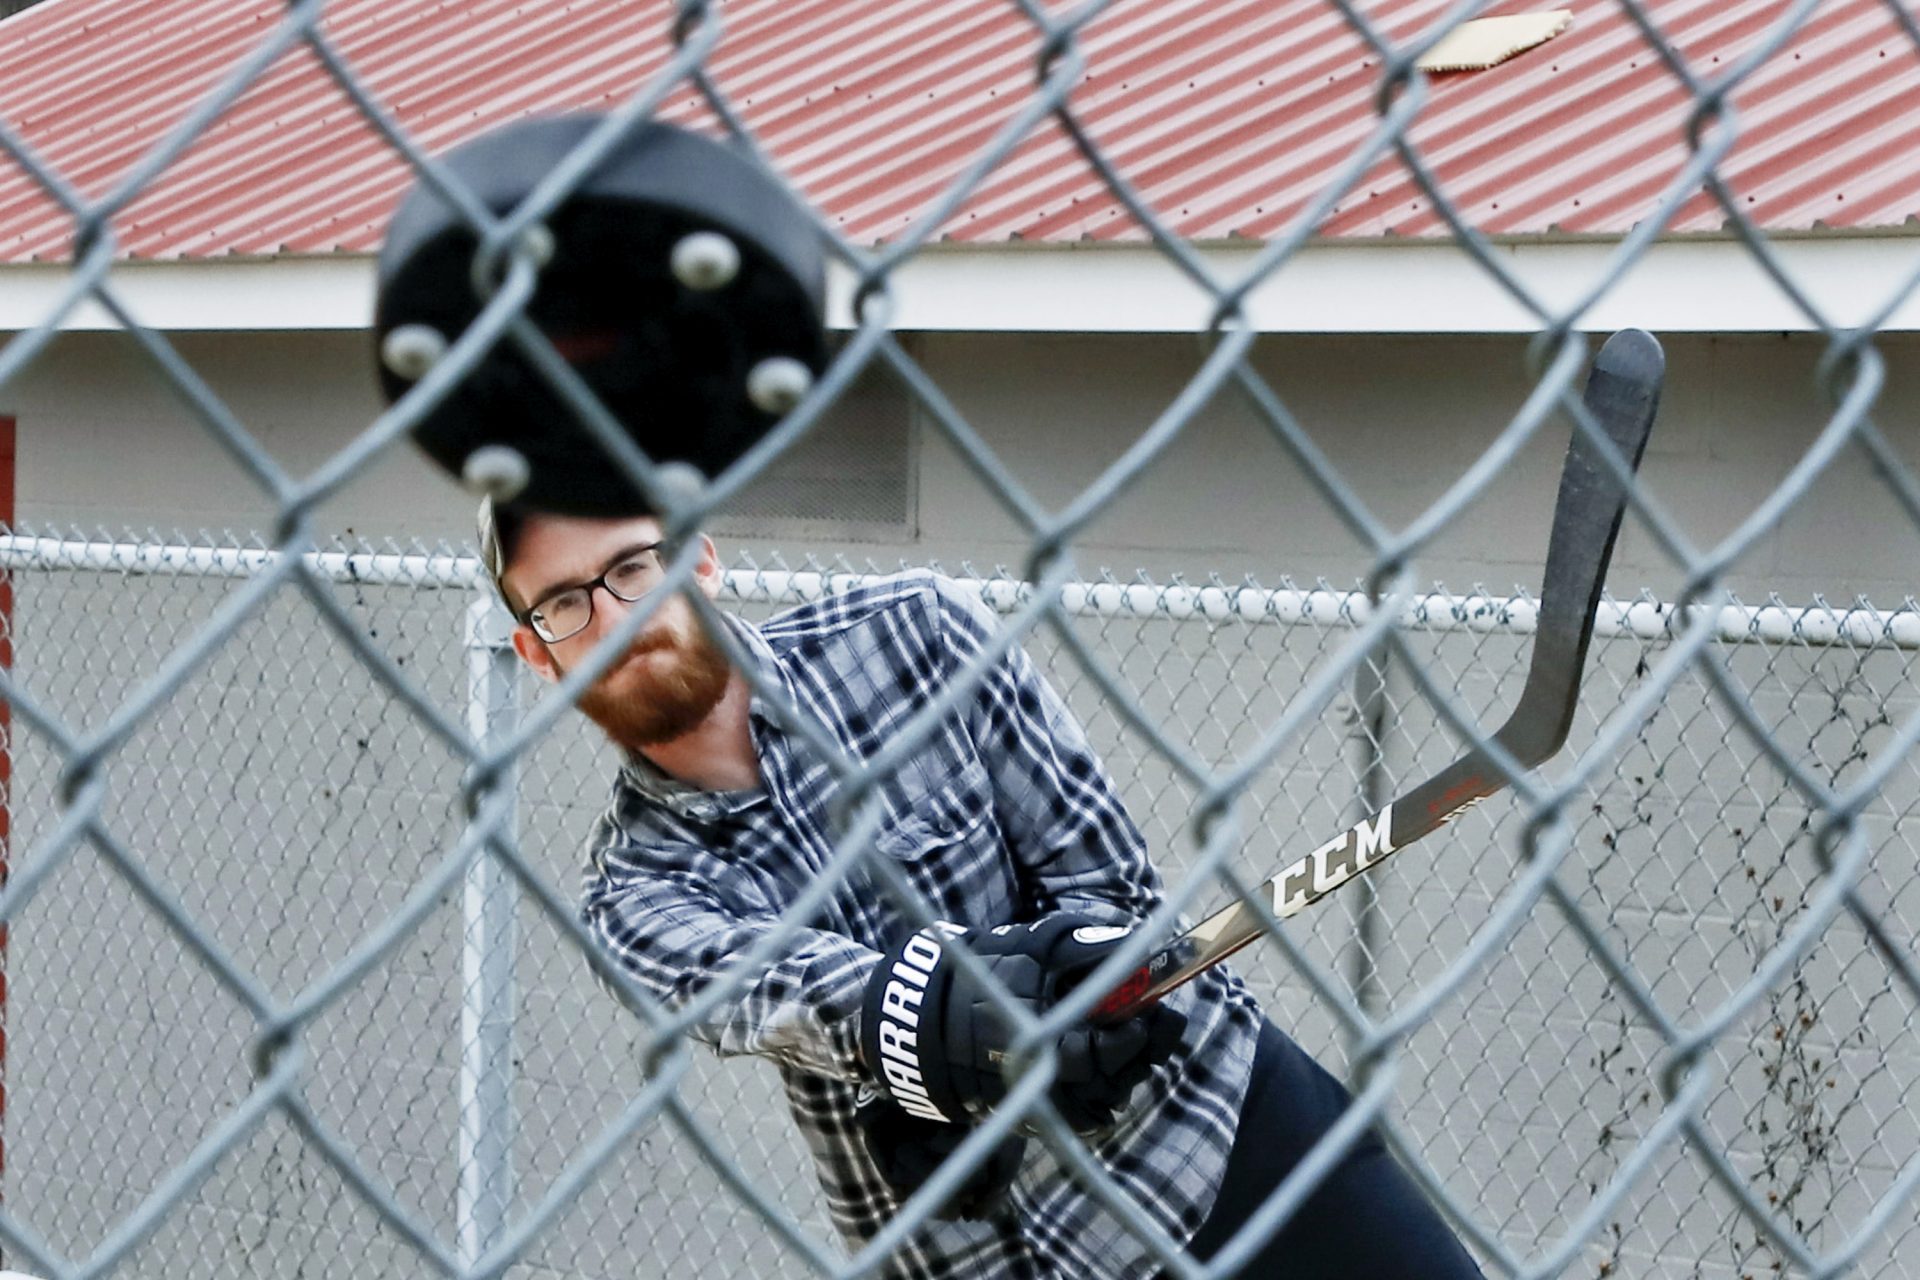 Jason Dapper, shoots a street hockey puck at the fence in one of the tennis courts at the local park as he practices his hockey skills with his wife, Friday, March 27, 2020, in Zelienople, Pa. The couple said they have taken to the park since the local rinks have closed with the outbreak of COVID-19.